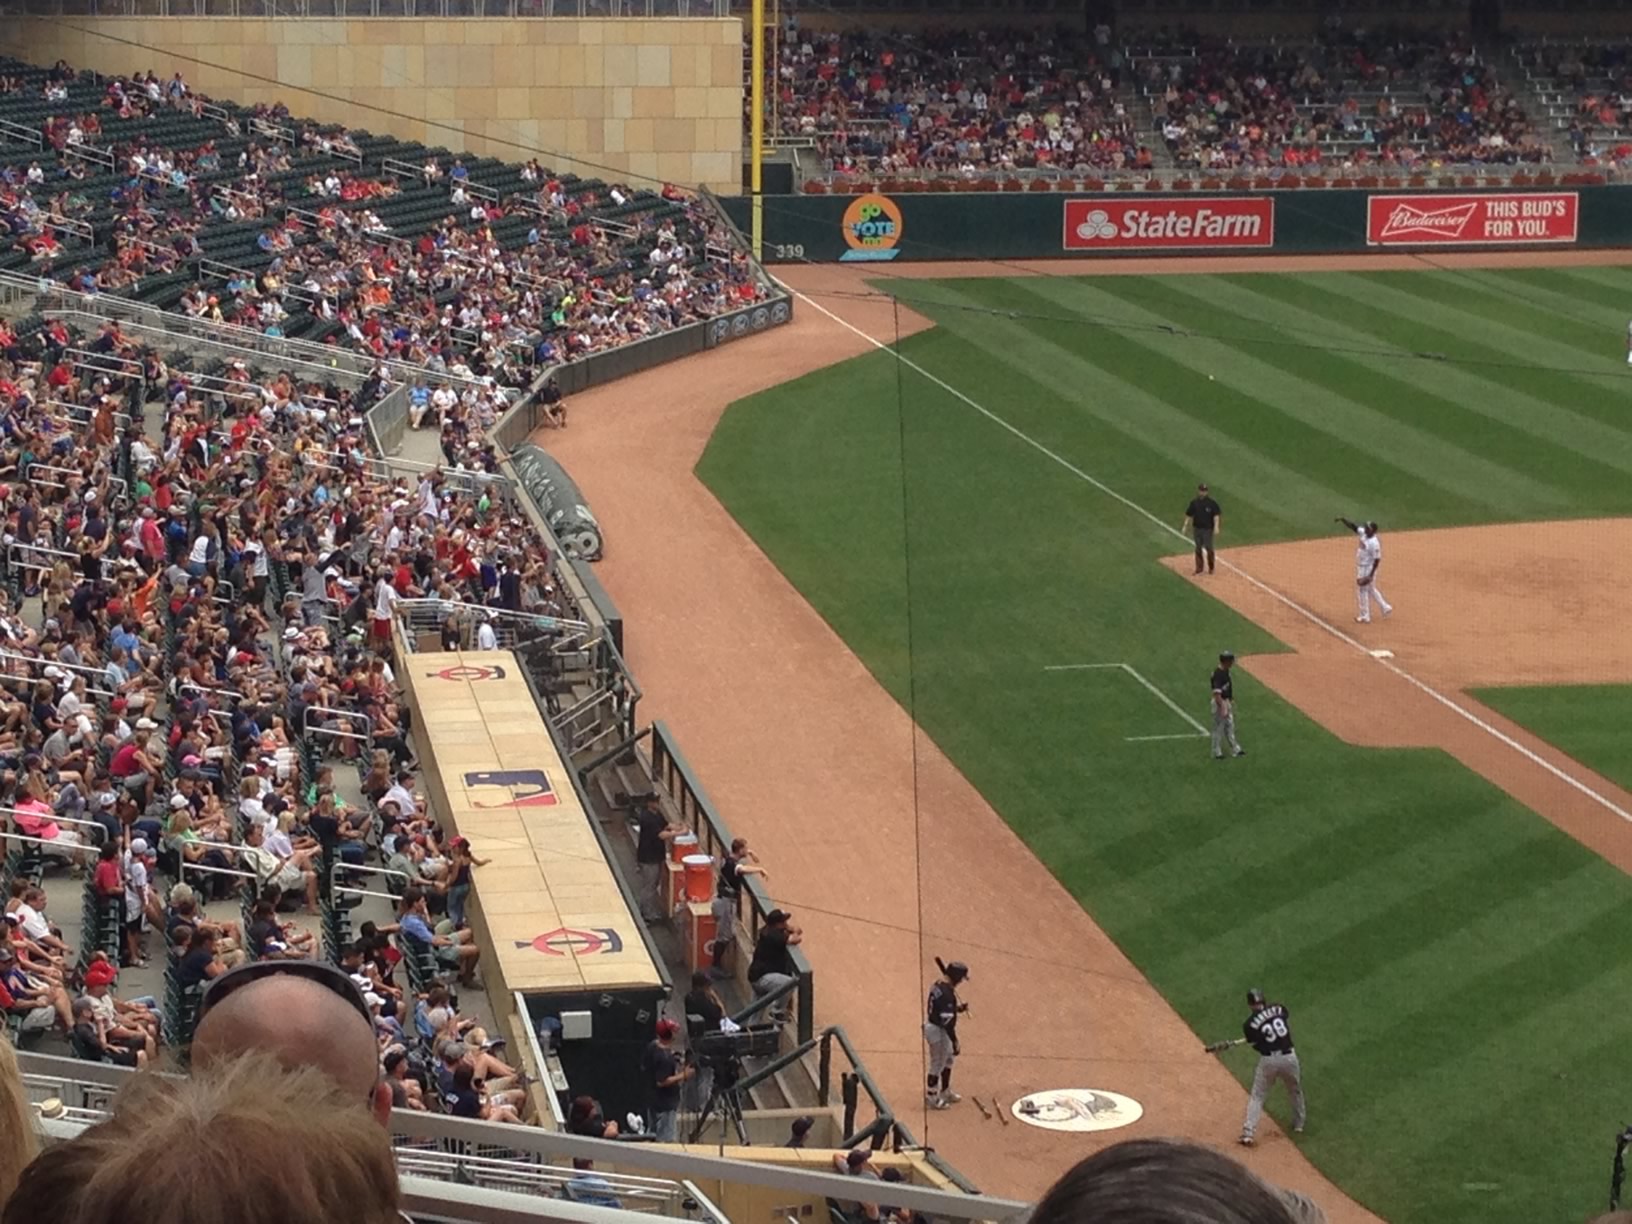 Target Field Seating for Twins Games - RateYourSeats.com